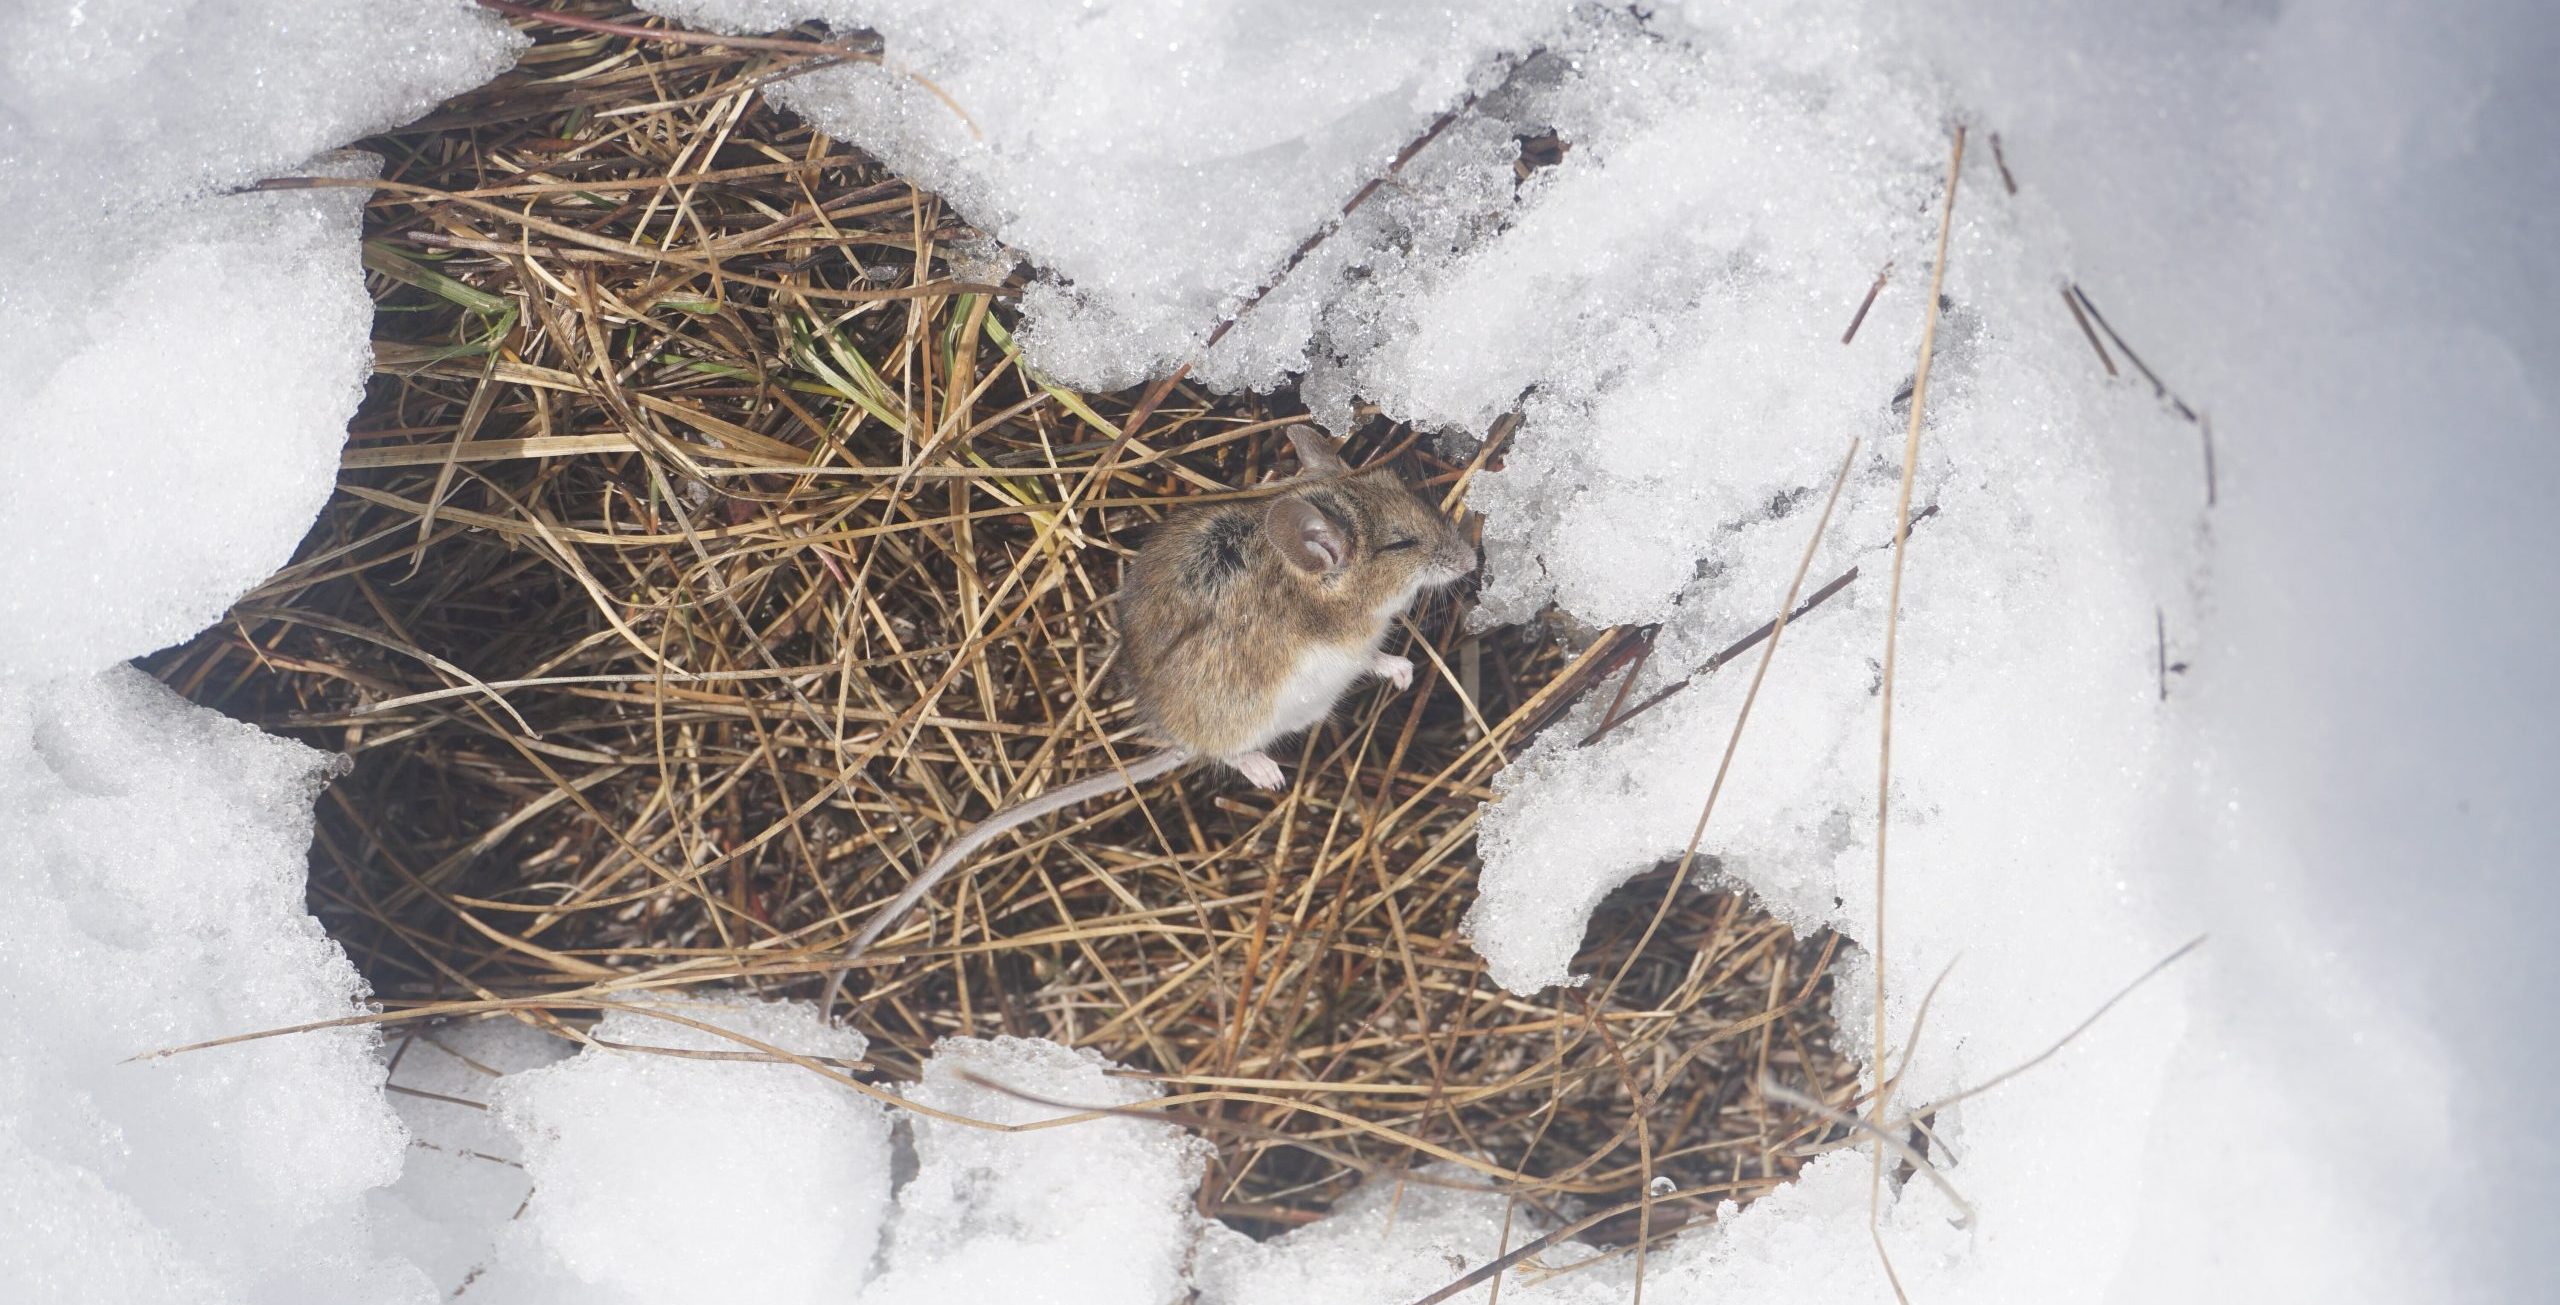 When is Rodent Season and What Do I Need To Do To Prepare?